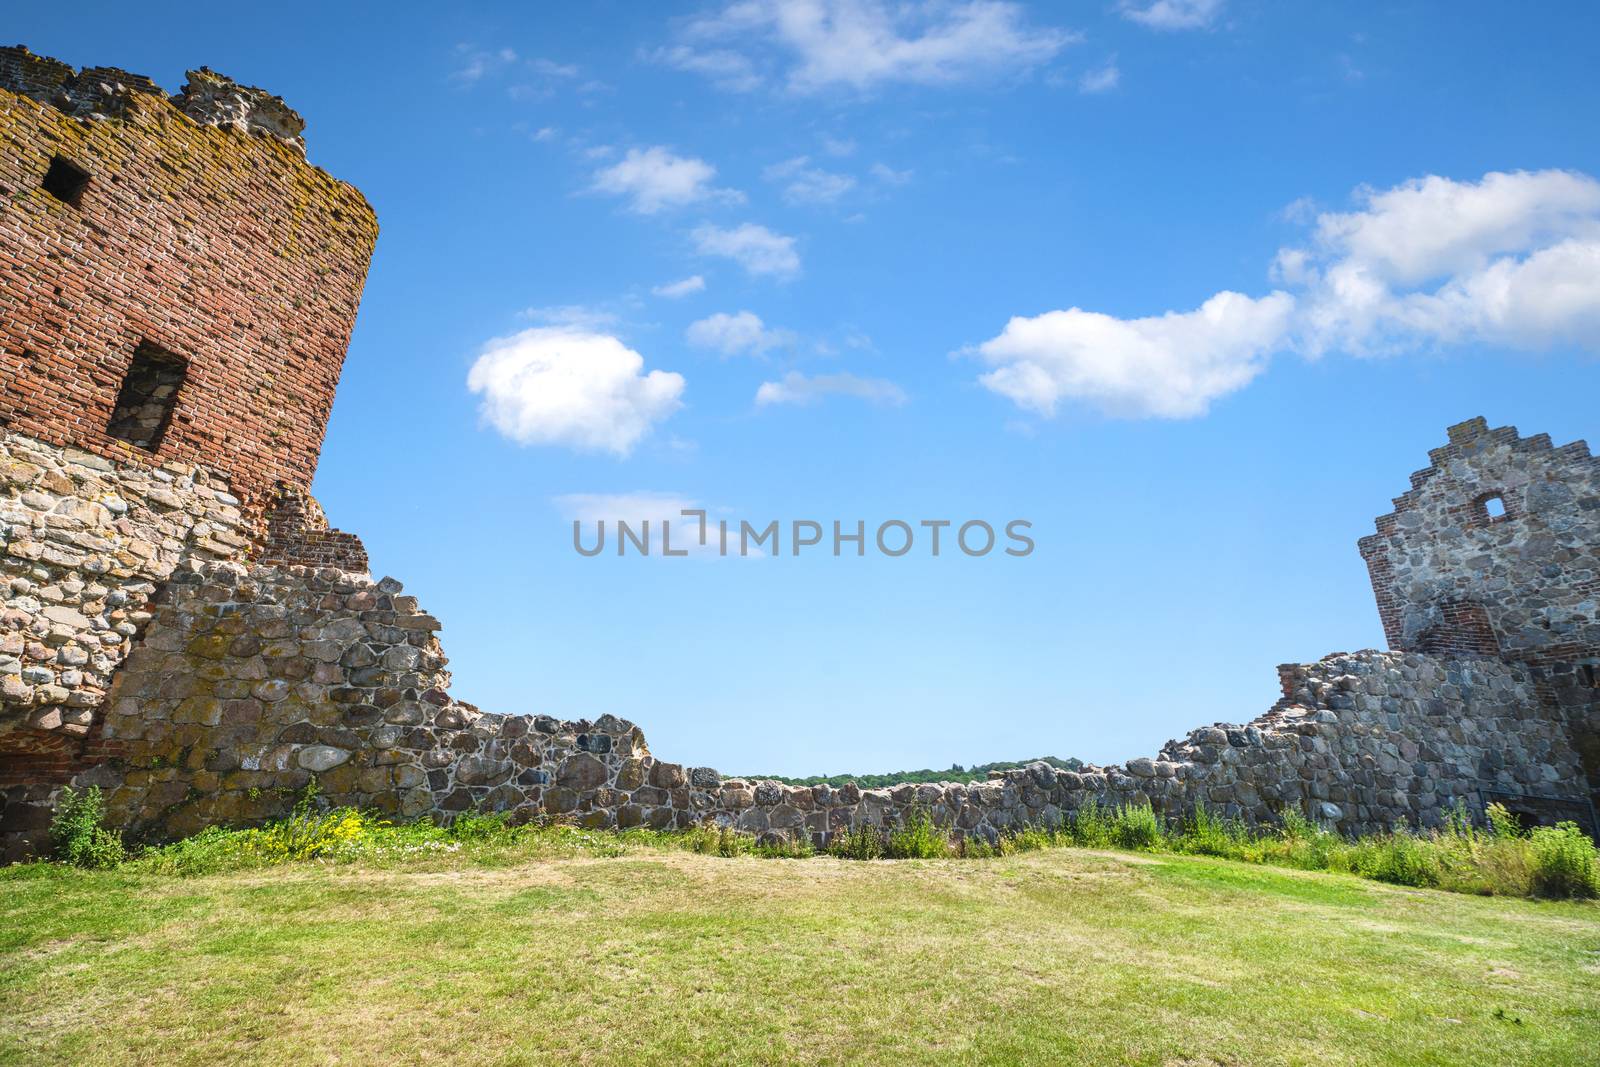 Castle ruin withh a stone wall under a blue sky with a green lawn in the front